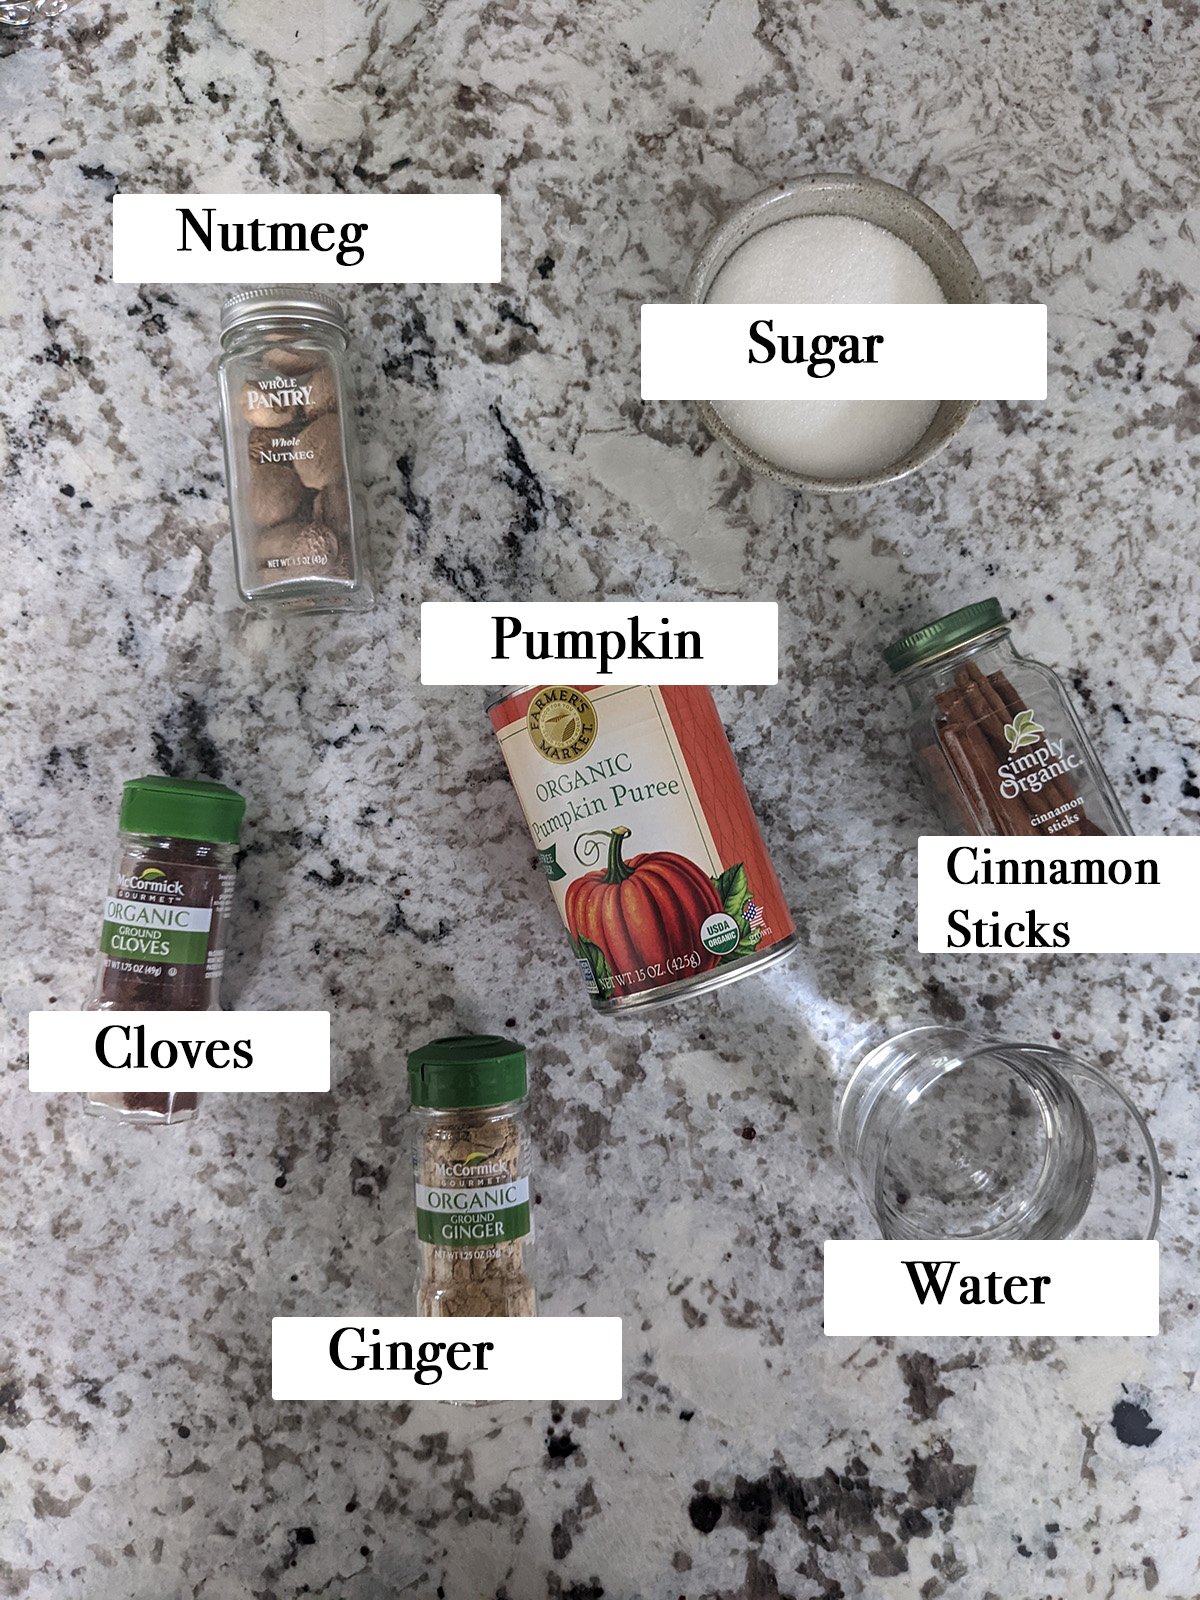 ingredients for making pumpkin spice syrup